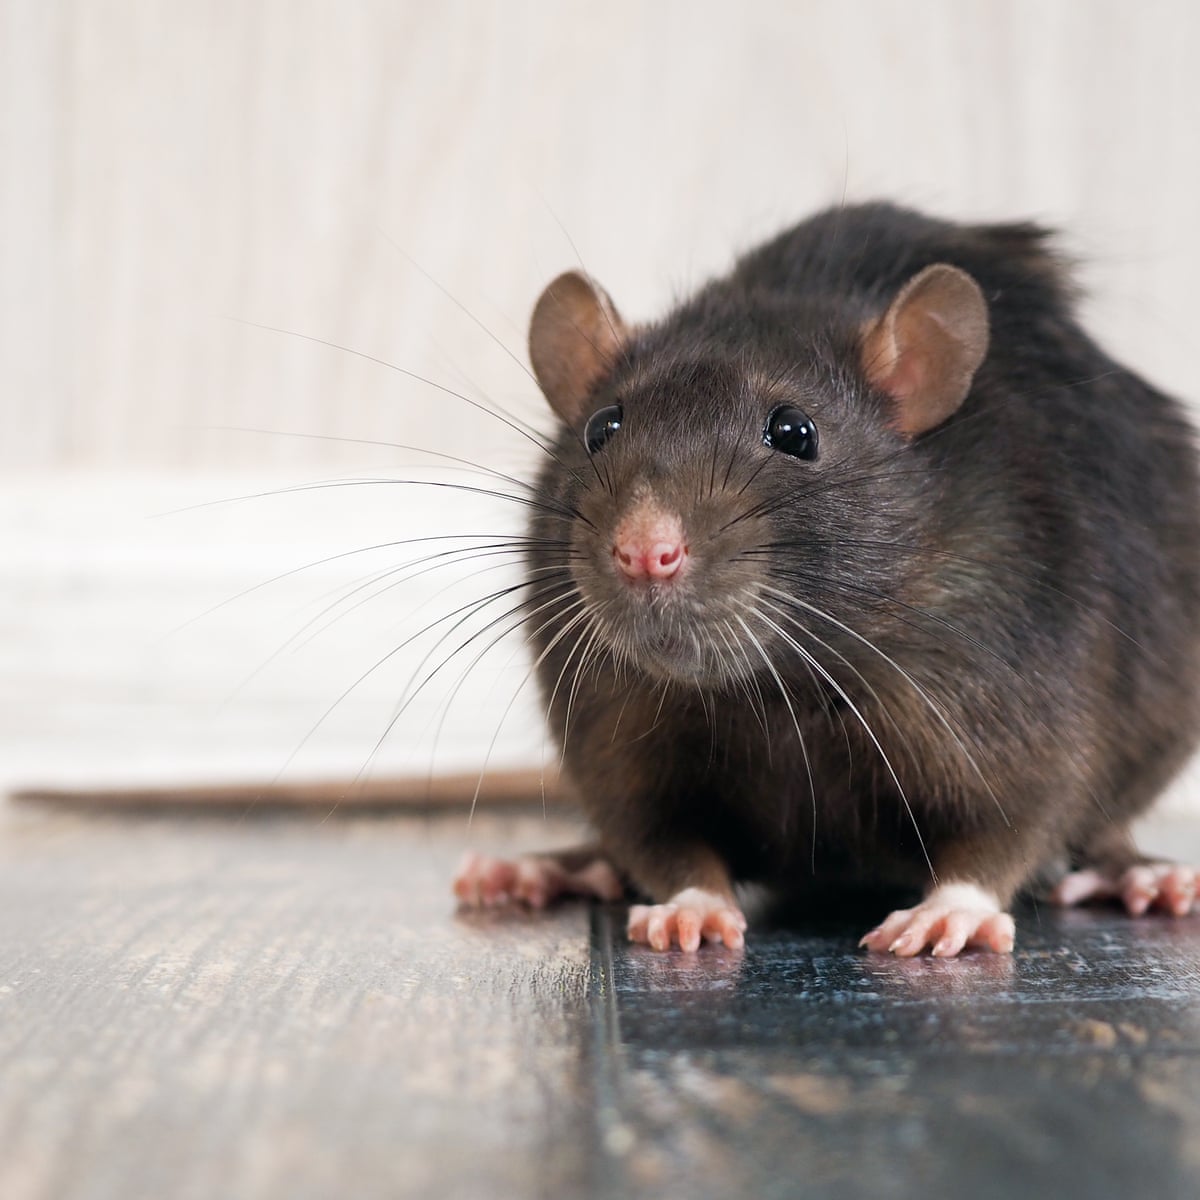 The Types of Diseases Rodents Carry